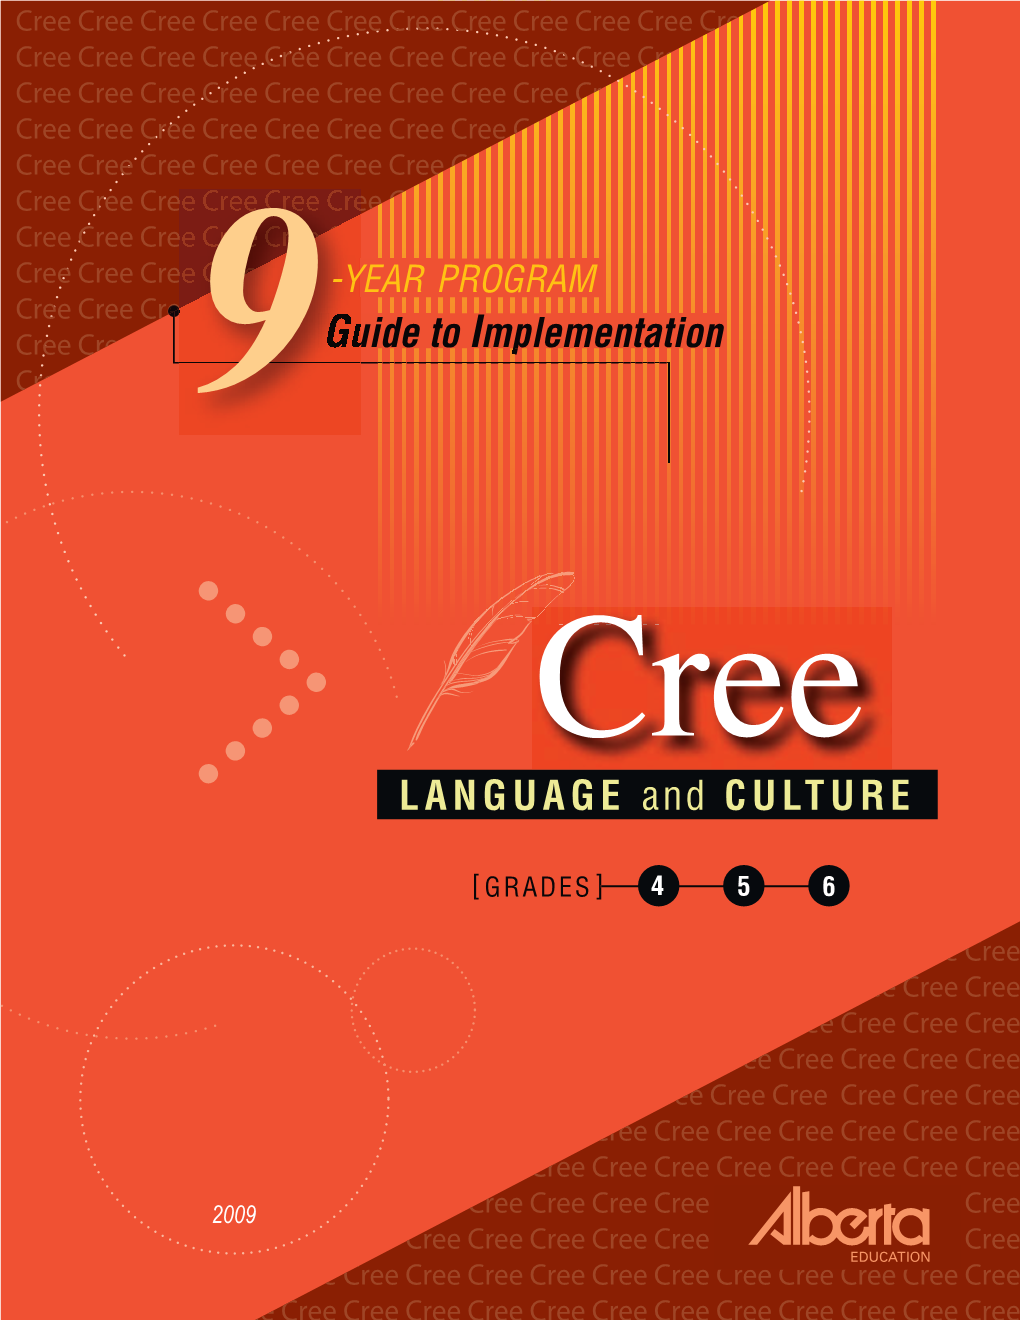 Language and Culture Guide to Implementation